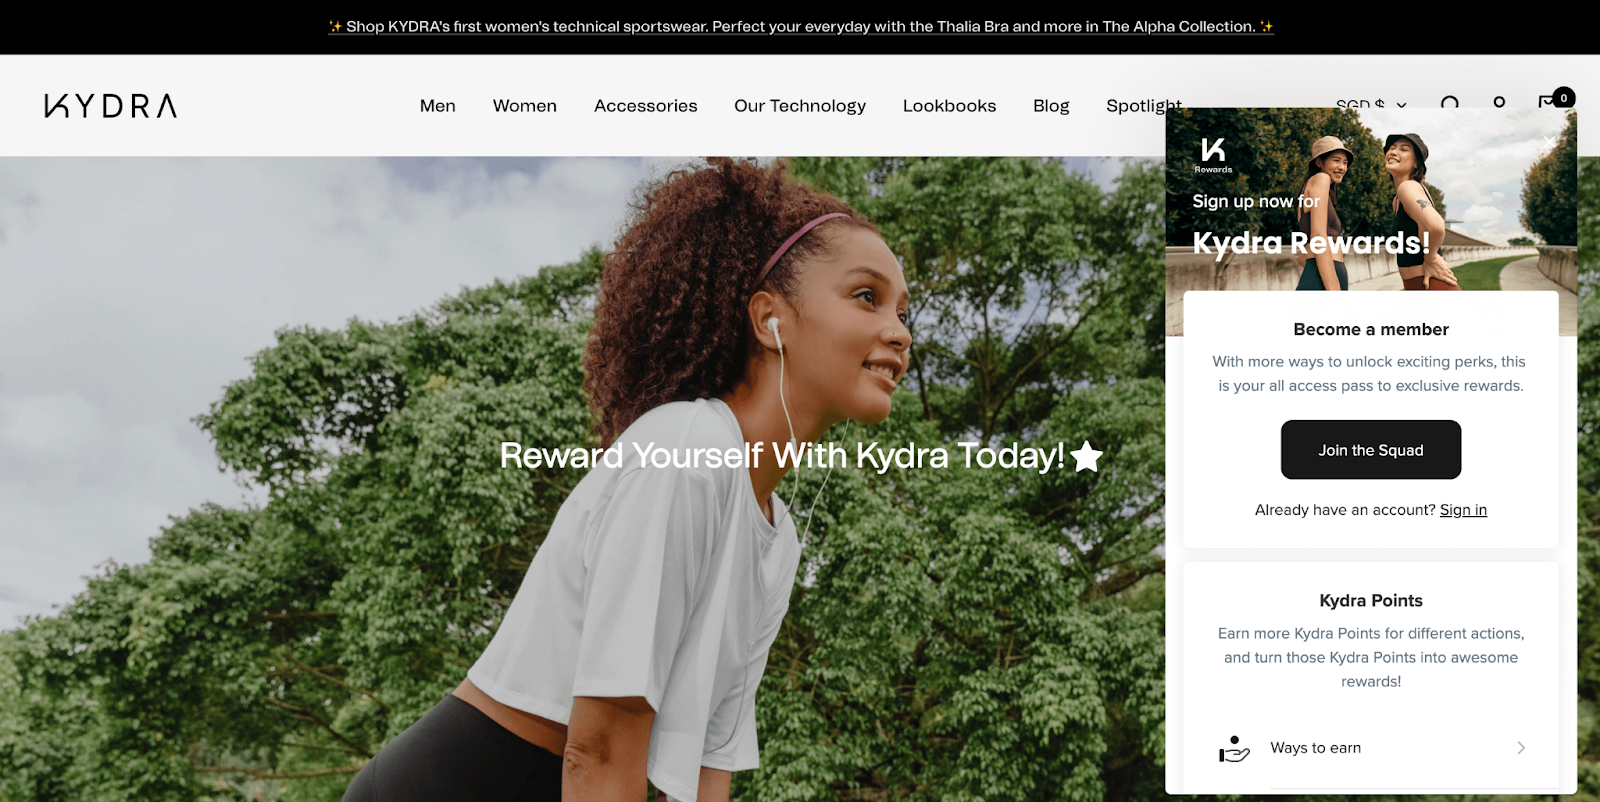 Fashion Industry Loyalty Program Examples–A screenshot from KYDRA Activewear’s rewards program explainer page. The image shows a Black woman wearing activewear while on a run outside. The text in front reads, “Reward Yourself With Kydra Today!” The rewards panel is visible on the right side of the screen. 